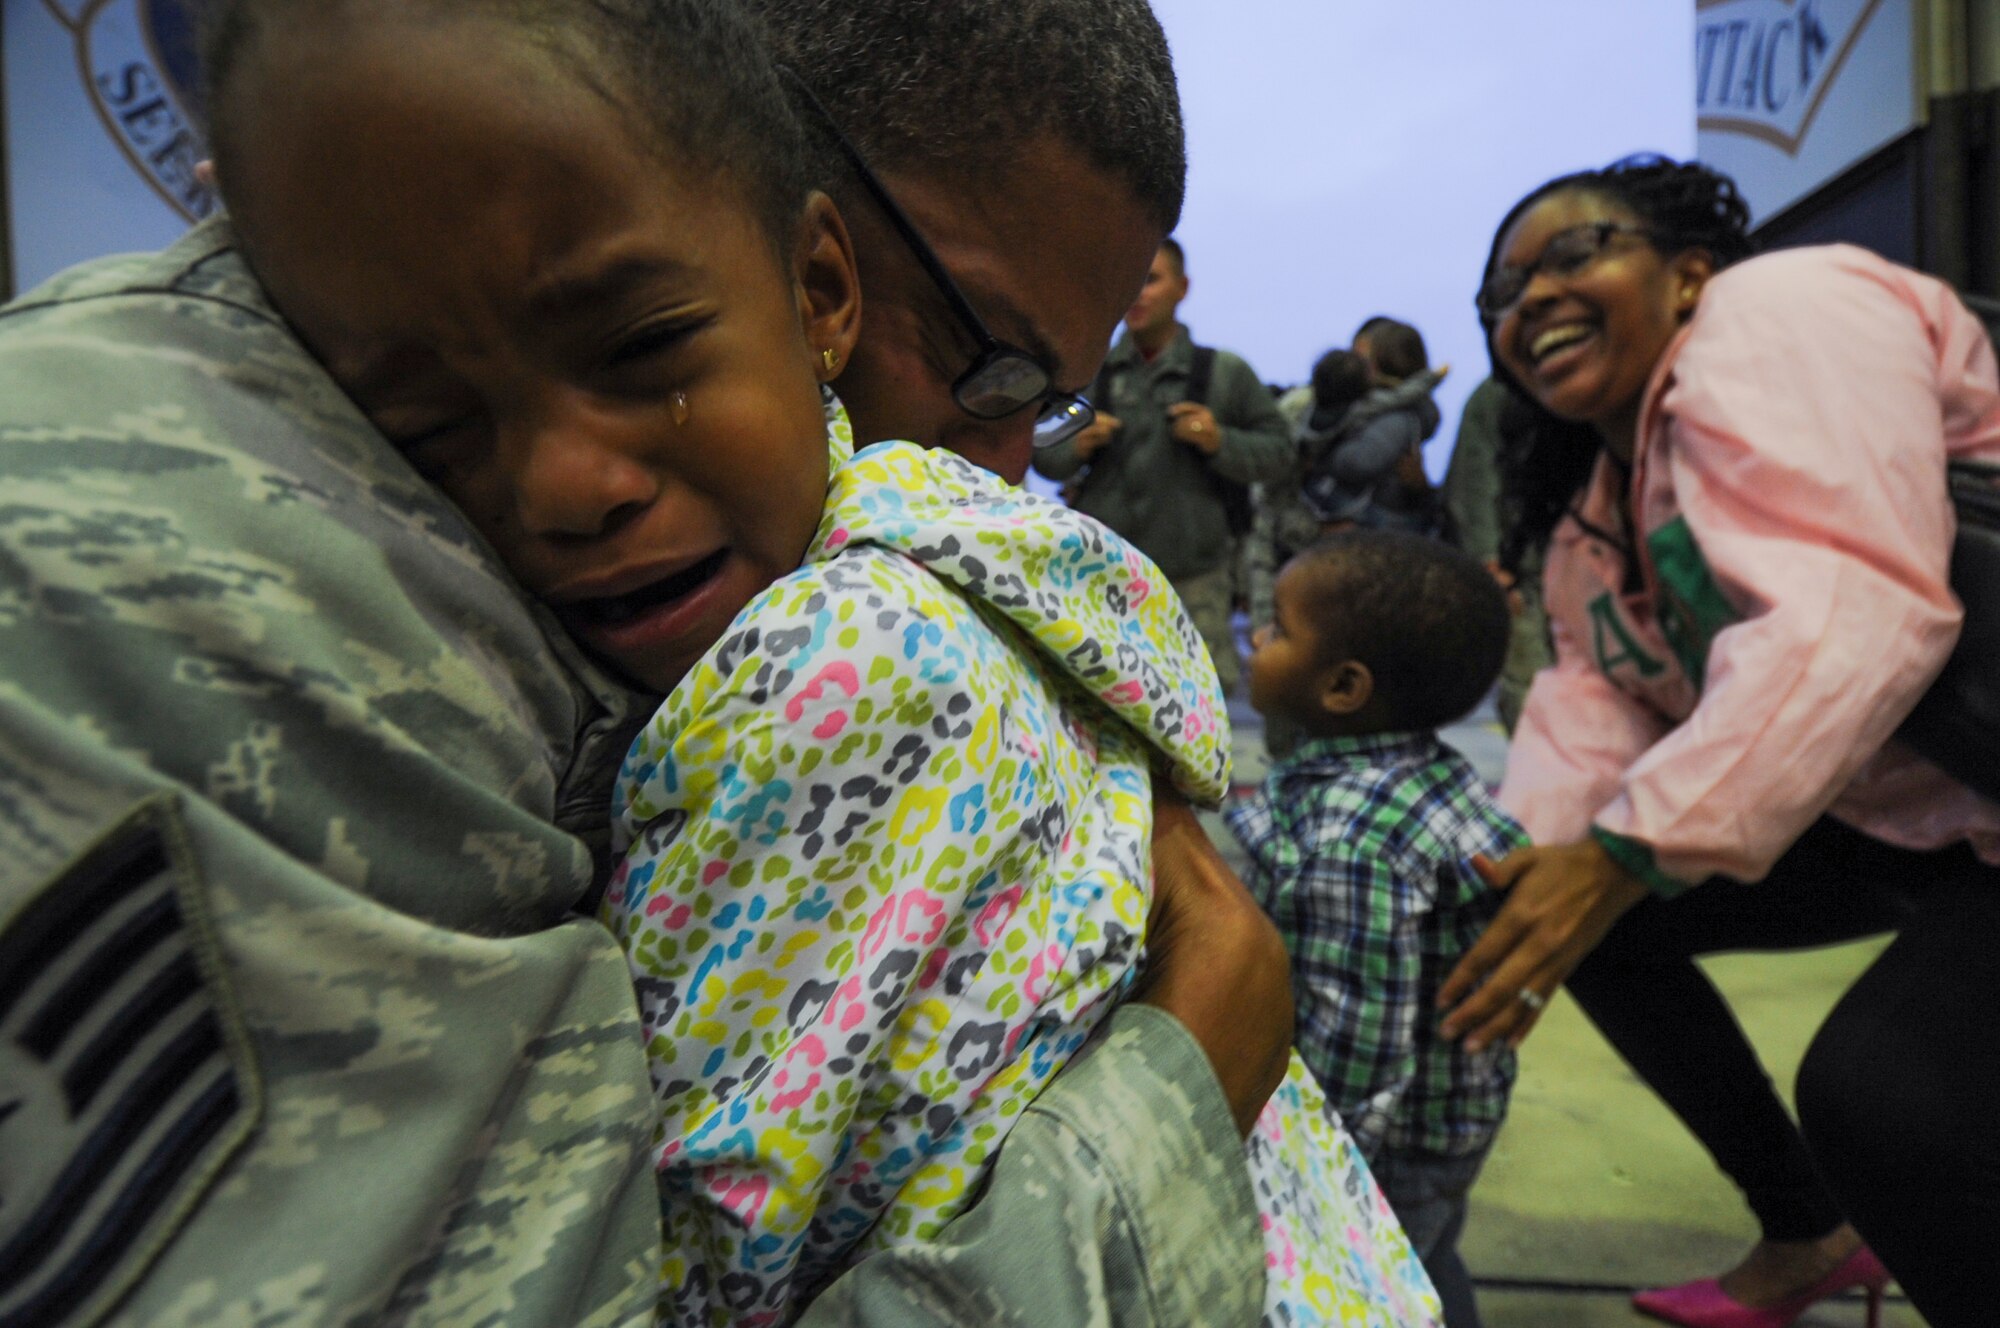 An Airman assigned to the 480th Expeditionary Fighter Squadron holds his daughter during the squadron’s return to Spangdahlem Air Base, Germany, Oct. 12, 2016. Approximately 300 of the Airmen, who serve in flight, maintenance or support roles for the F-16 Fighting Falcon fighter aircraft, completed a six-month deployment to Southwest Asia by providing close air support and dynamic targeting operations as part of the squadron’s first deployment in support of Operation Inherent Resolve. Operation Inherent Resolve aims to eliminate the Da'esh terrorist group and the threat they pose to Iraq, Syria and the wider international community. (U.S. Air Force photo by Staff Sgt. Joe W. McFadden)